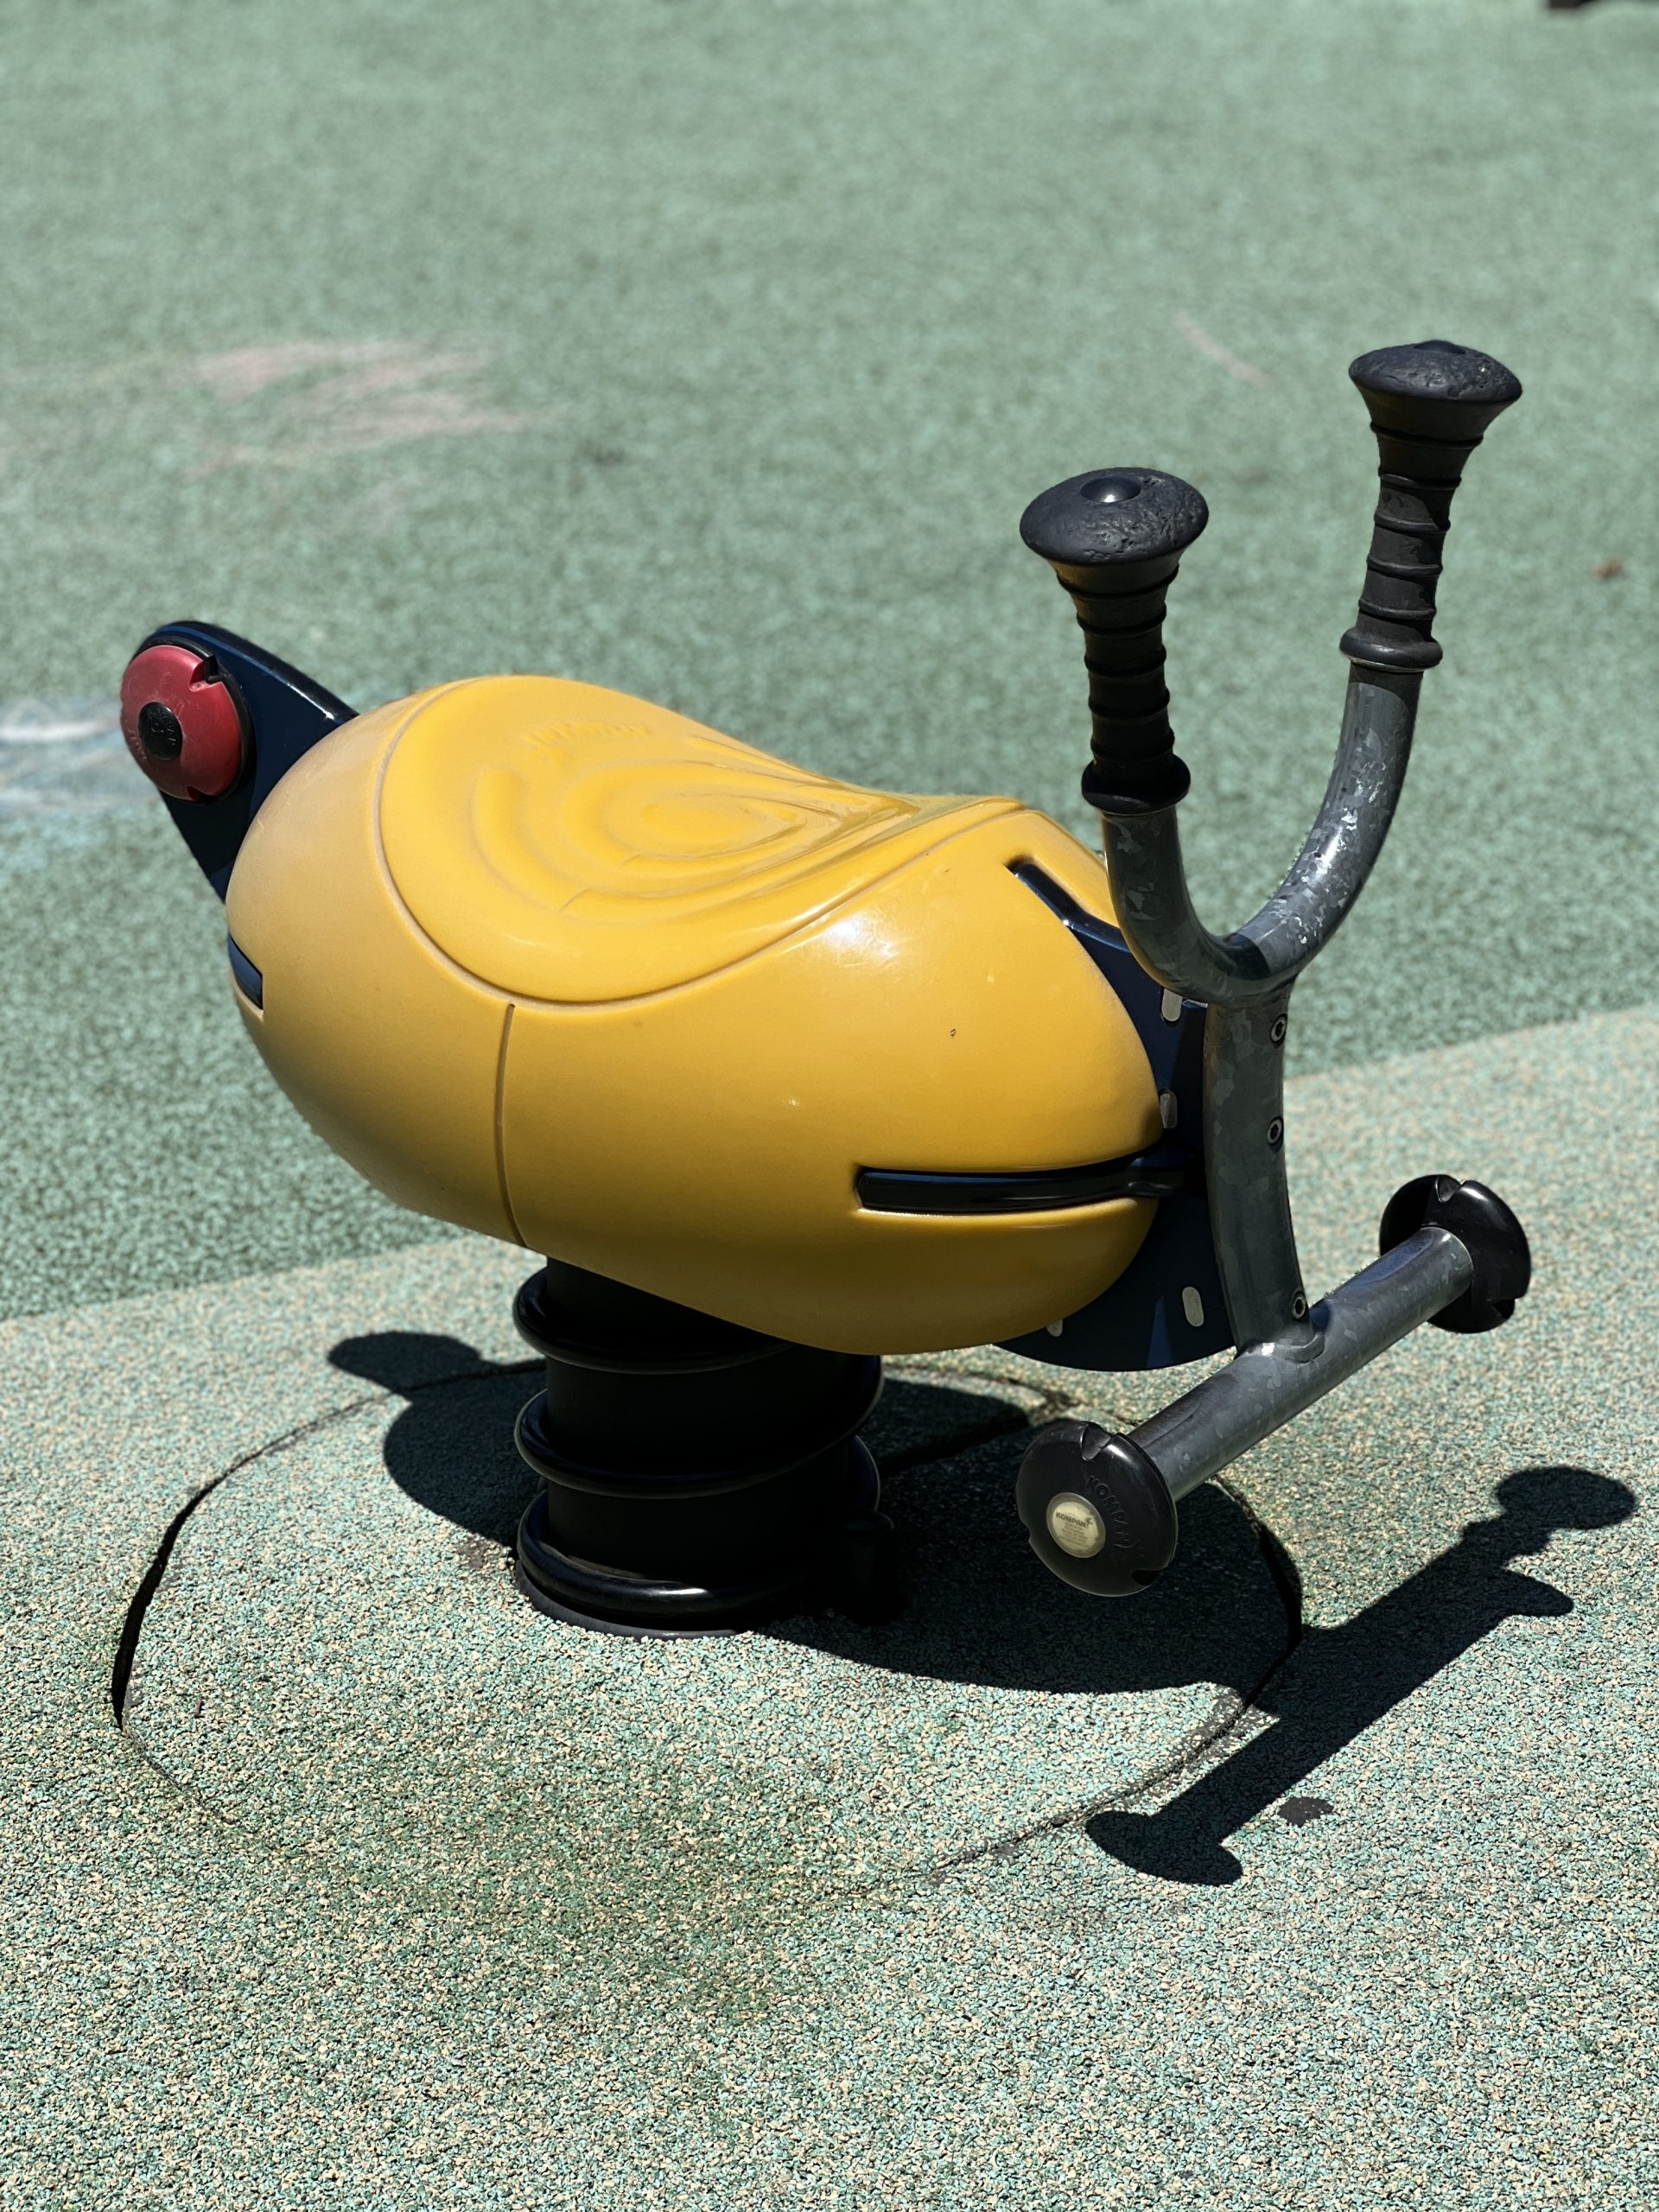 FEATURES - Ride on toy yellow AT Newport Green Park Playground in Jersey City NJ